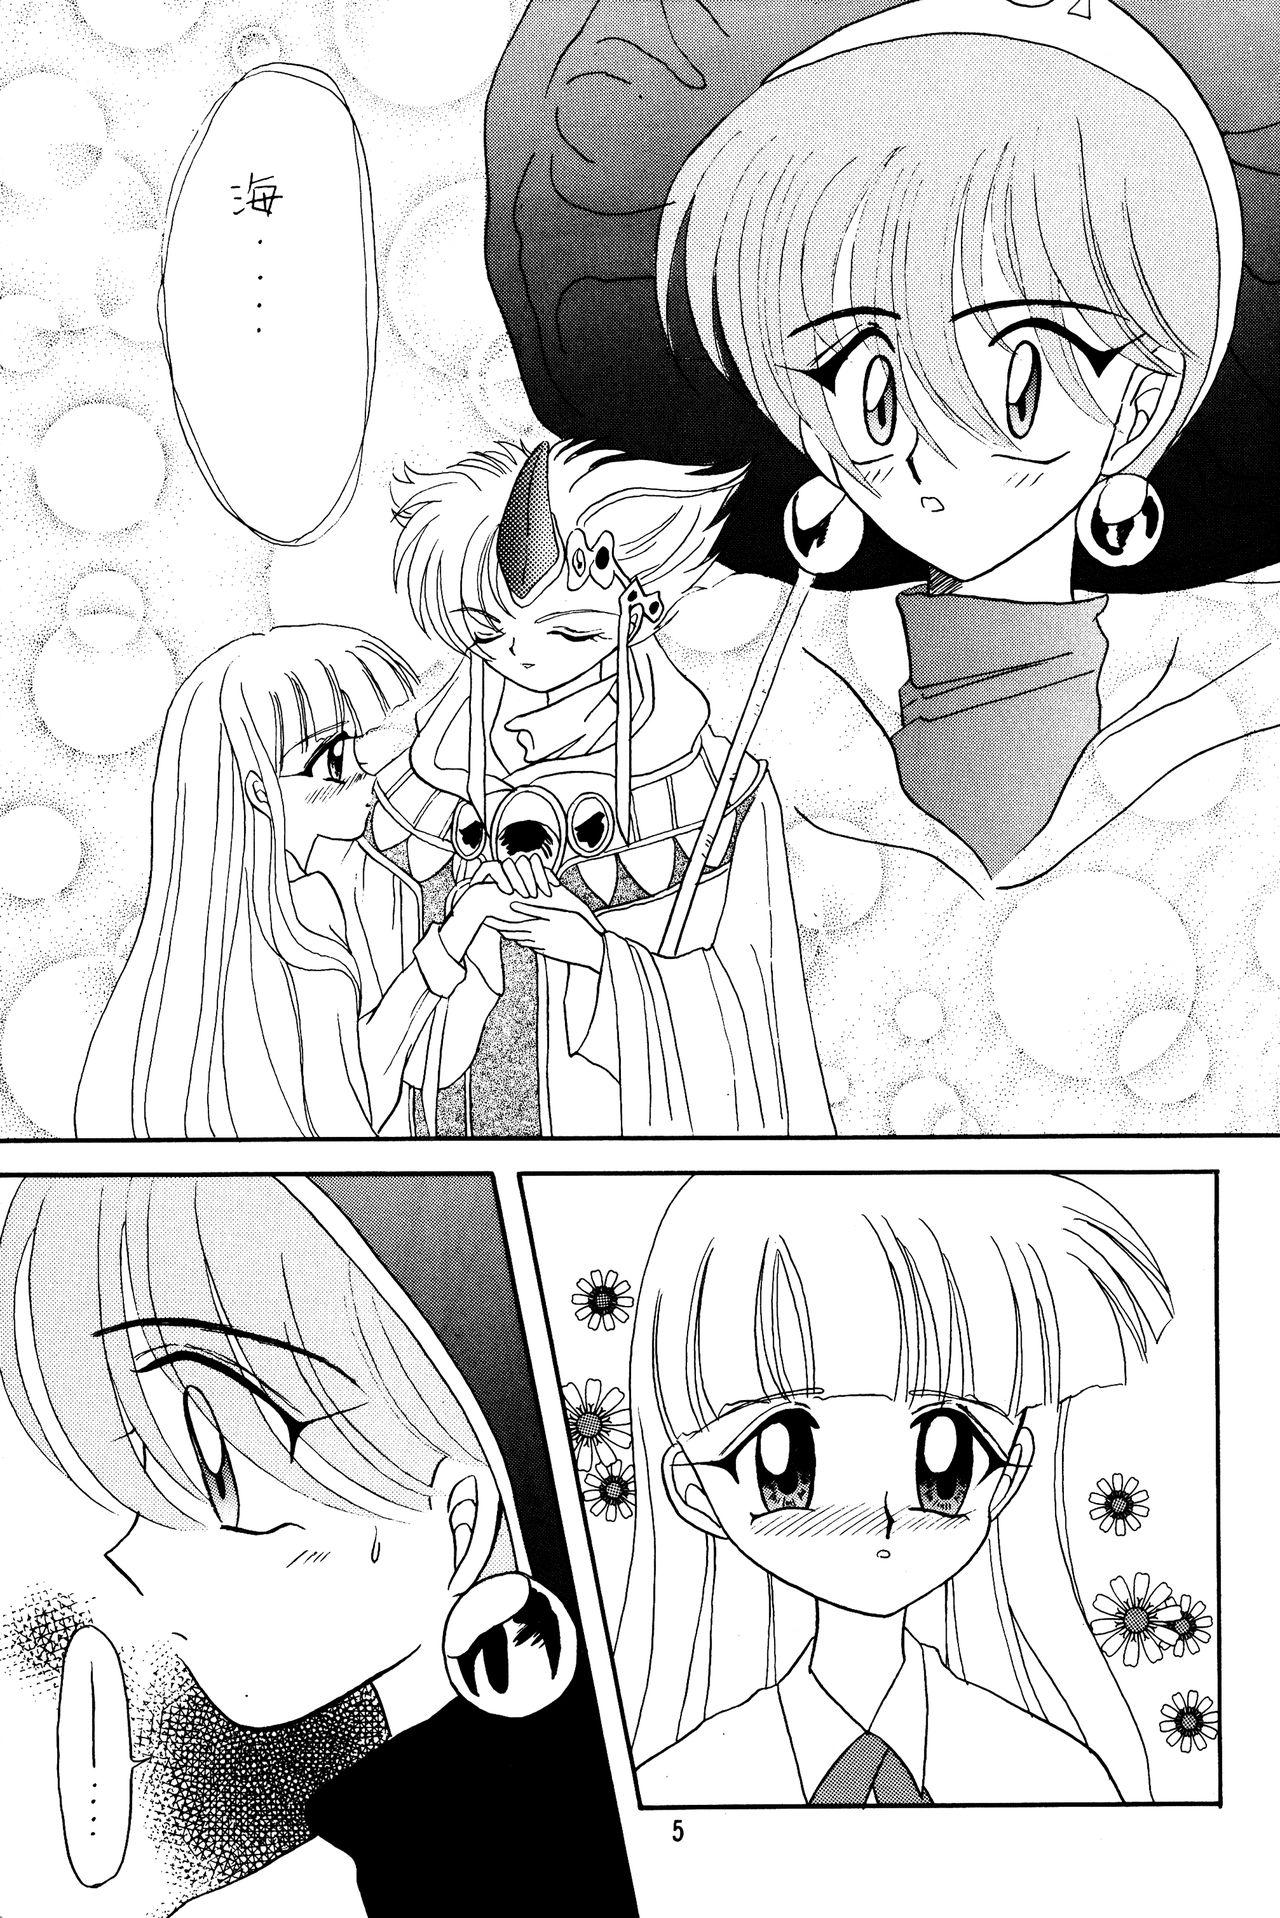 Freaky Suppin - Magic knight rayearth She - Page 4